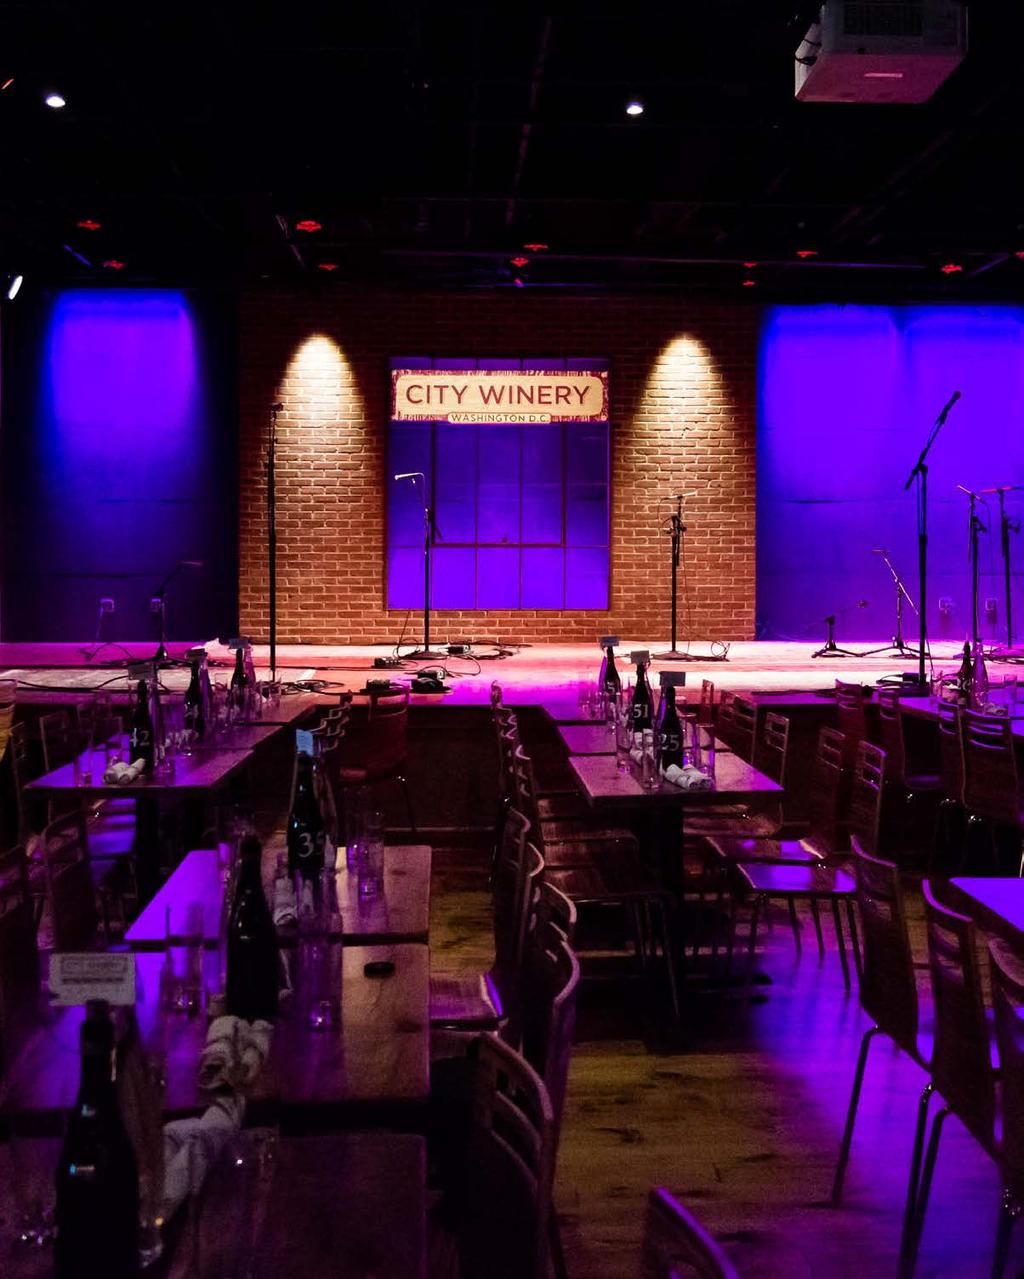 Listen... City Winery provides a state of the art audio and visual system to accommodate all of our clients needs.